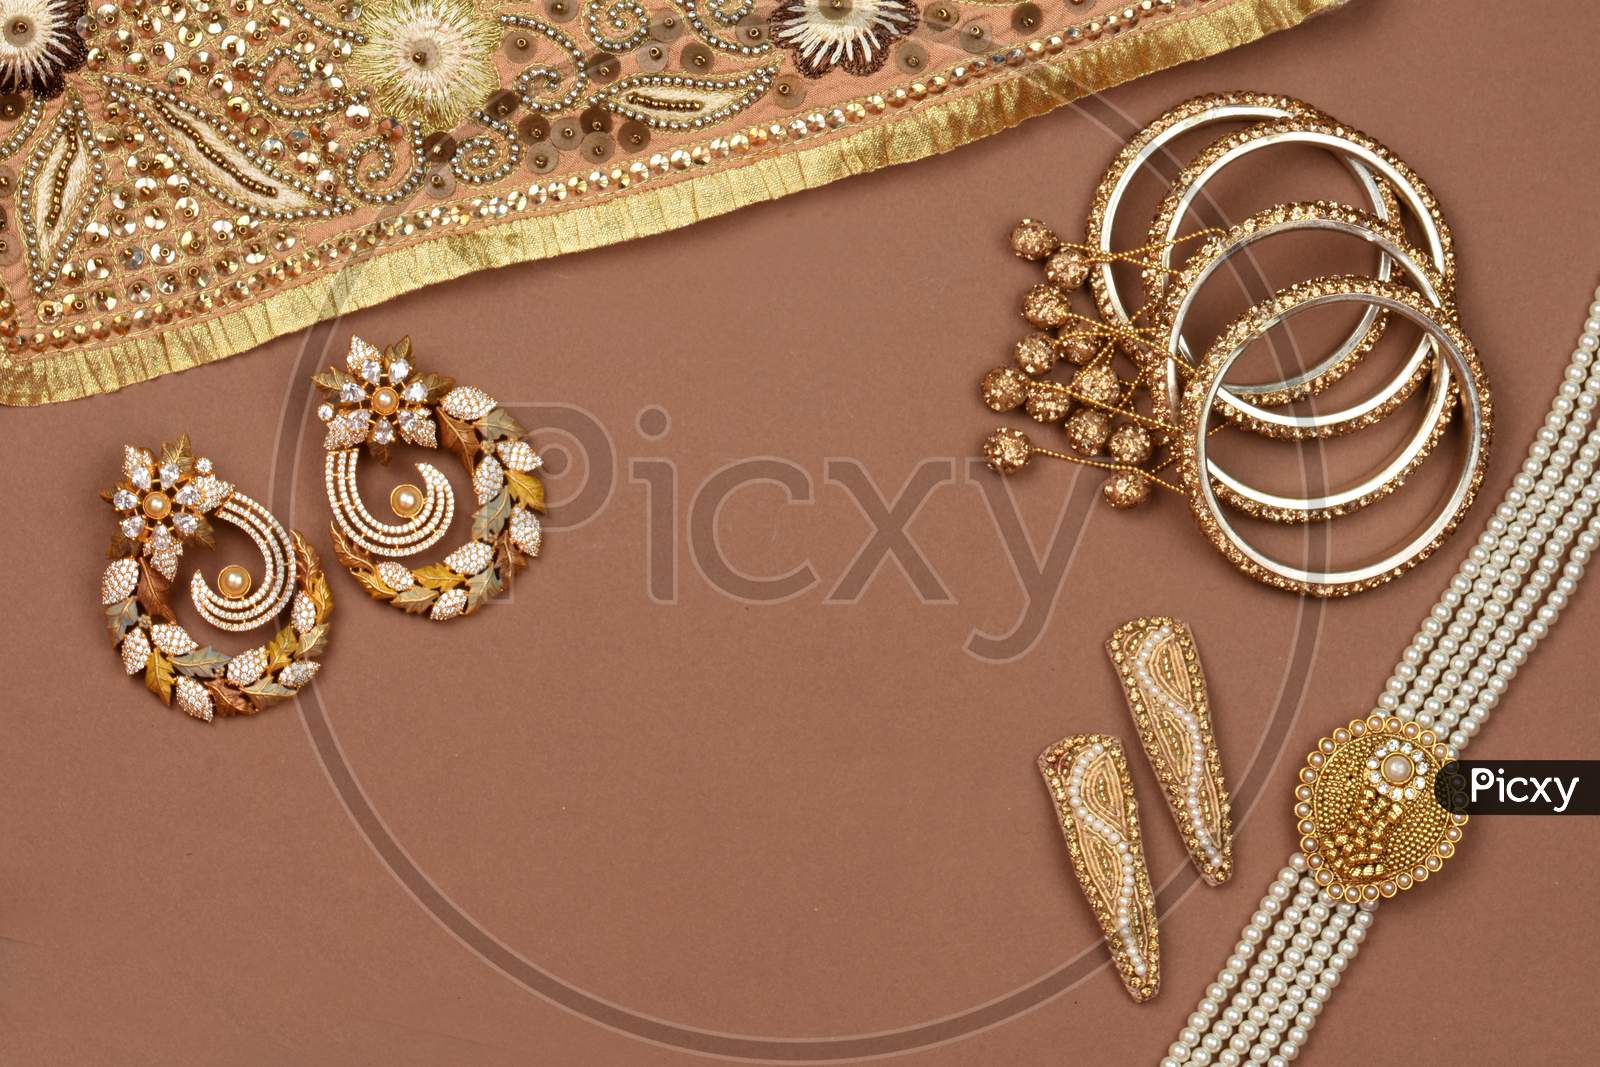 Pearl Jewelry On A Brown Background, Golden Scarf, Pearl Bracelet, Pearl Hair Clip, Pearl Necklace, Pearl Earringsjewelry Background.Style, Fashion And Design Of Jewelry. Indian Traditional Jewellery